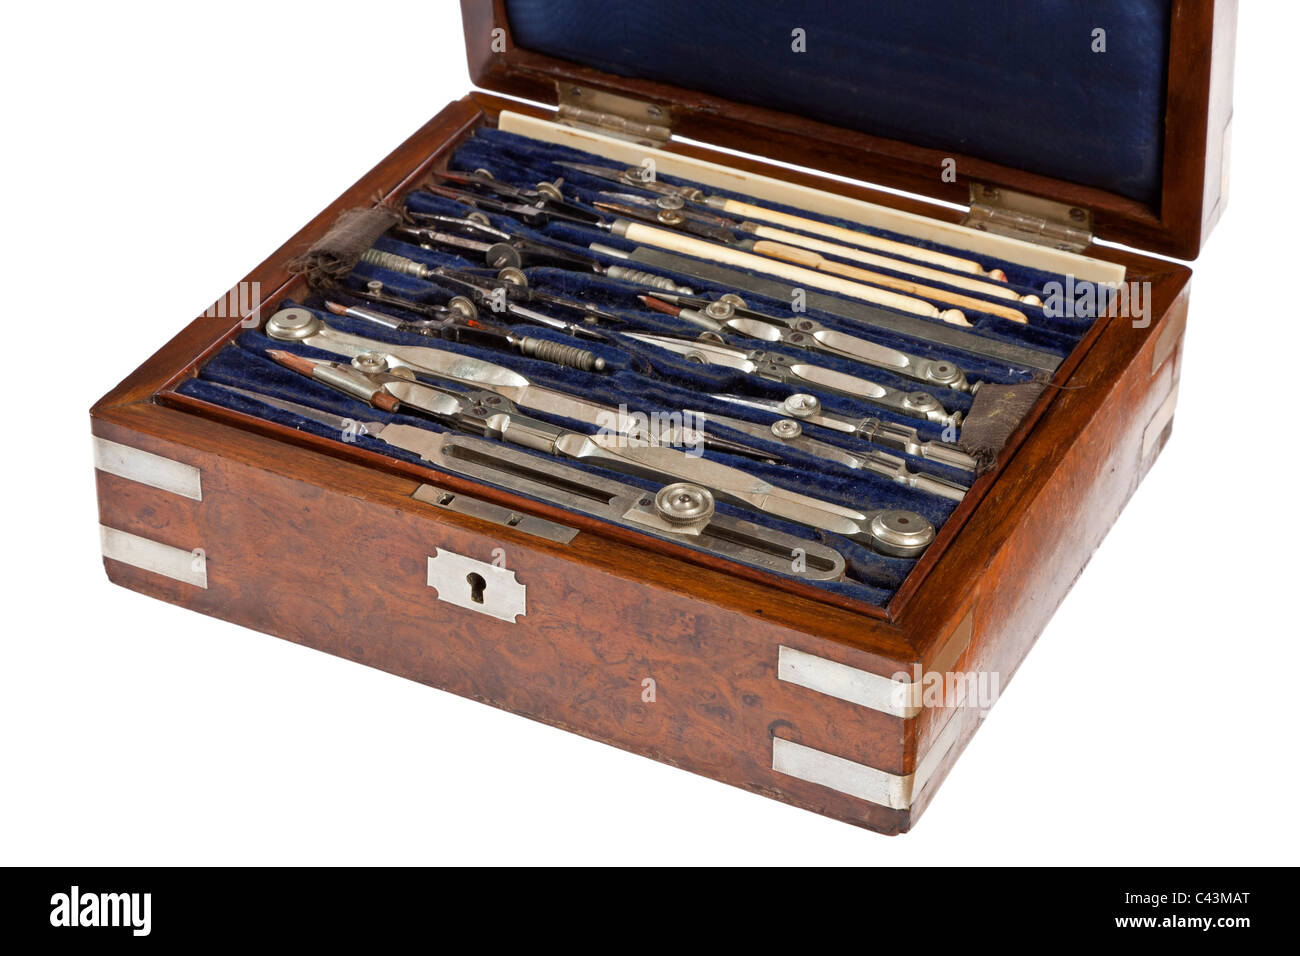 Set of antique drawing instruments in burr walnut cabinet JMH4938 Stock Photo